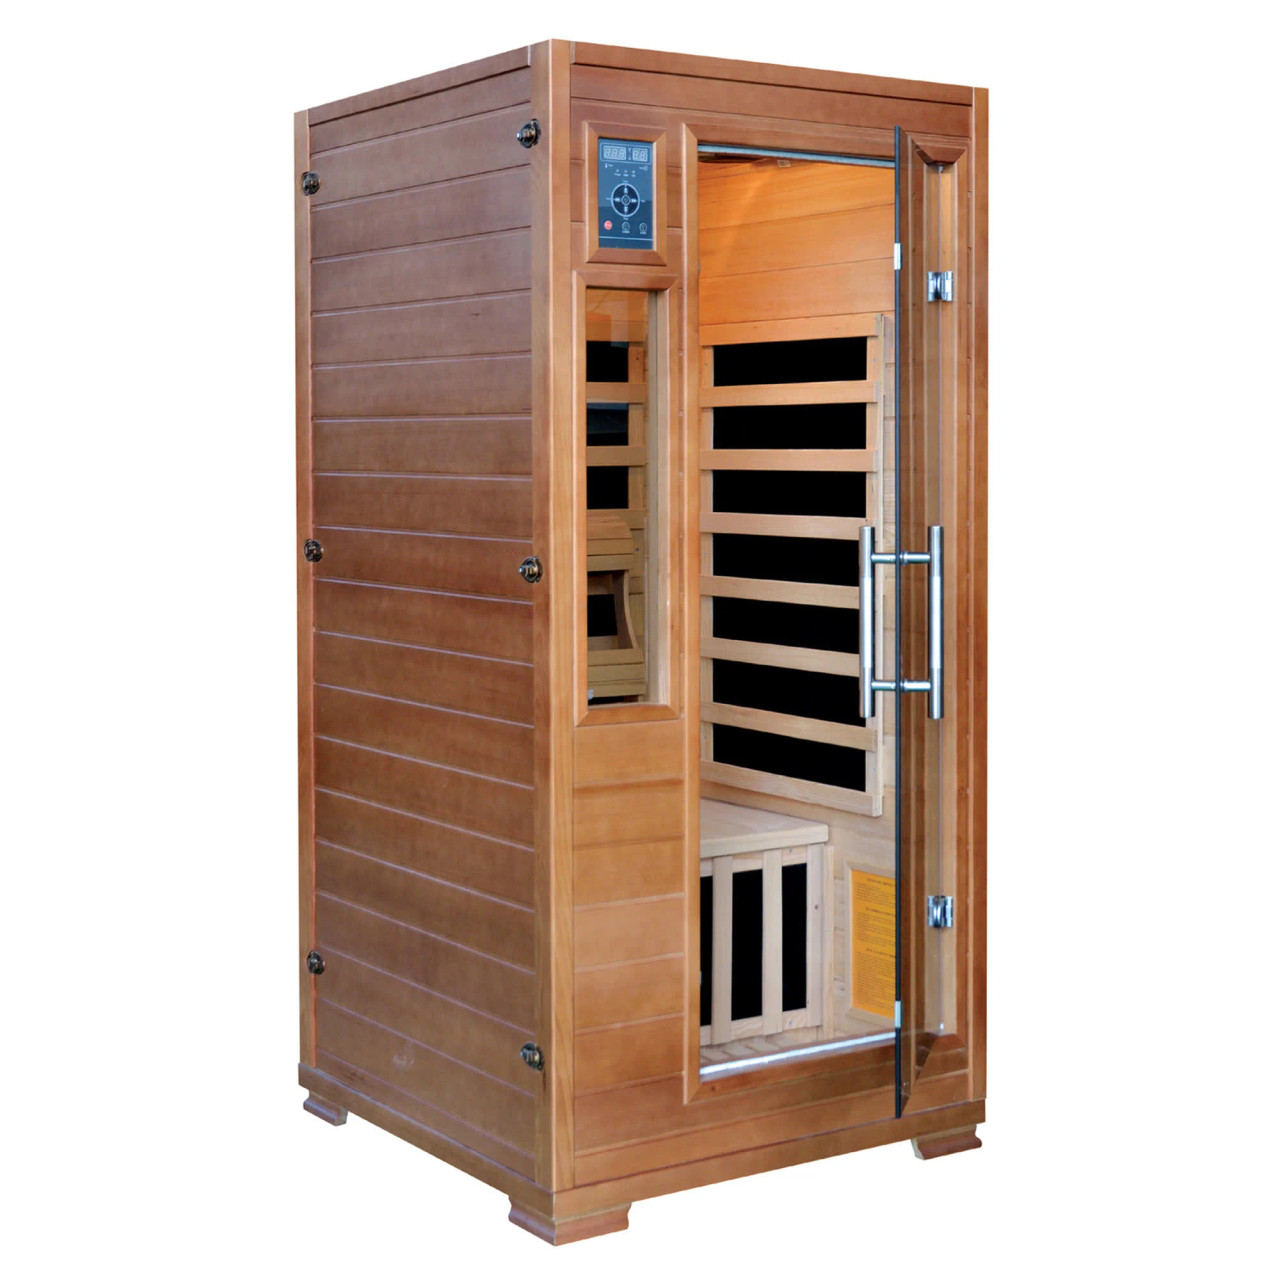 SA3202, FAR, Blue Wave, HeatWave, Majestic, Hemlock, Infrared, Sauna, 5-Carbon, Heaters, FREE SHIPPING, 1 person, 2 person, 120v, sound system, 672875801749